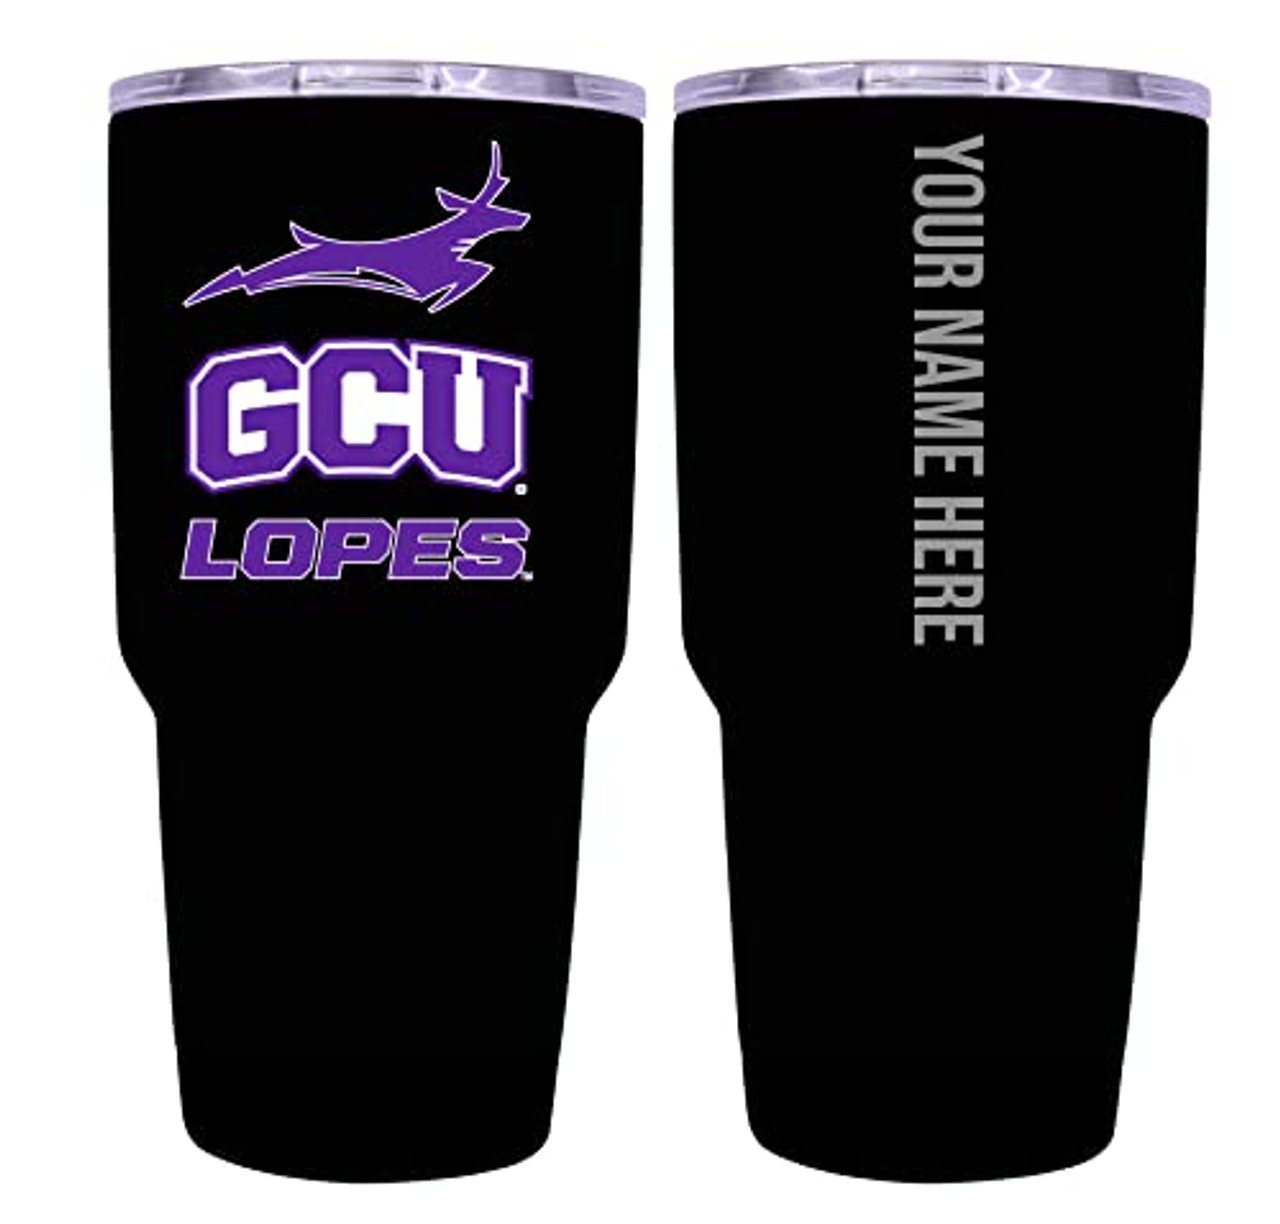 Collegiate Custom Personalized Grand Canyon University Lopes, 24 oz Insulated Stainless Steel Tumbler with Engraved Name (Black)